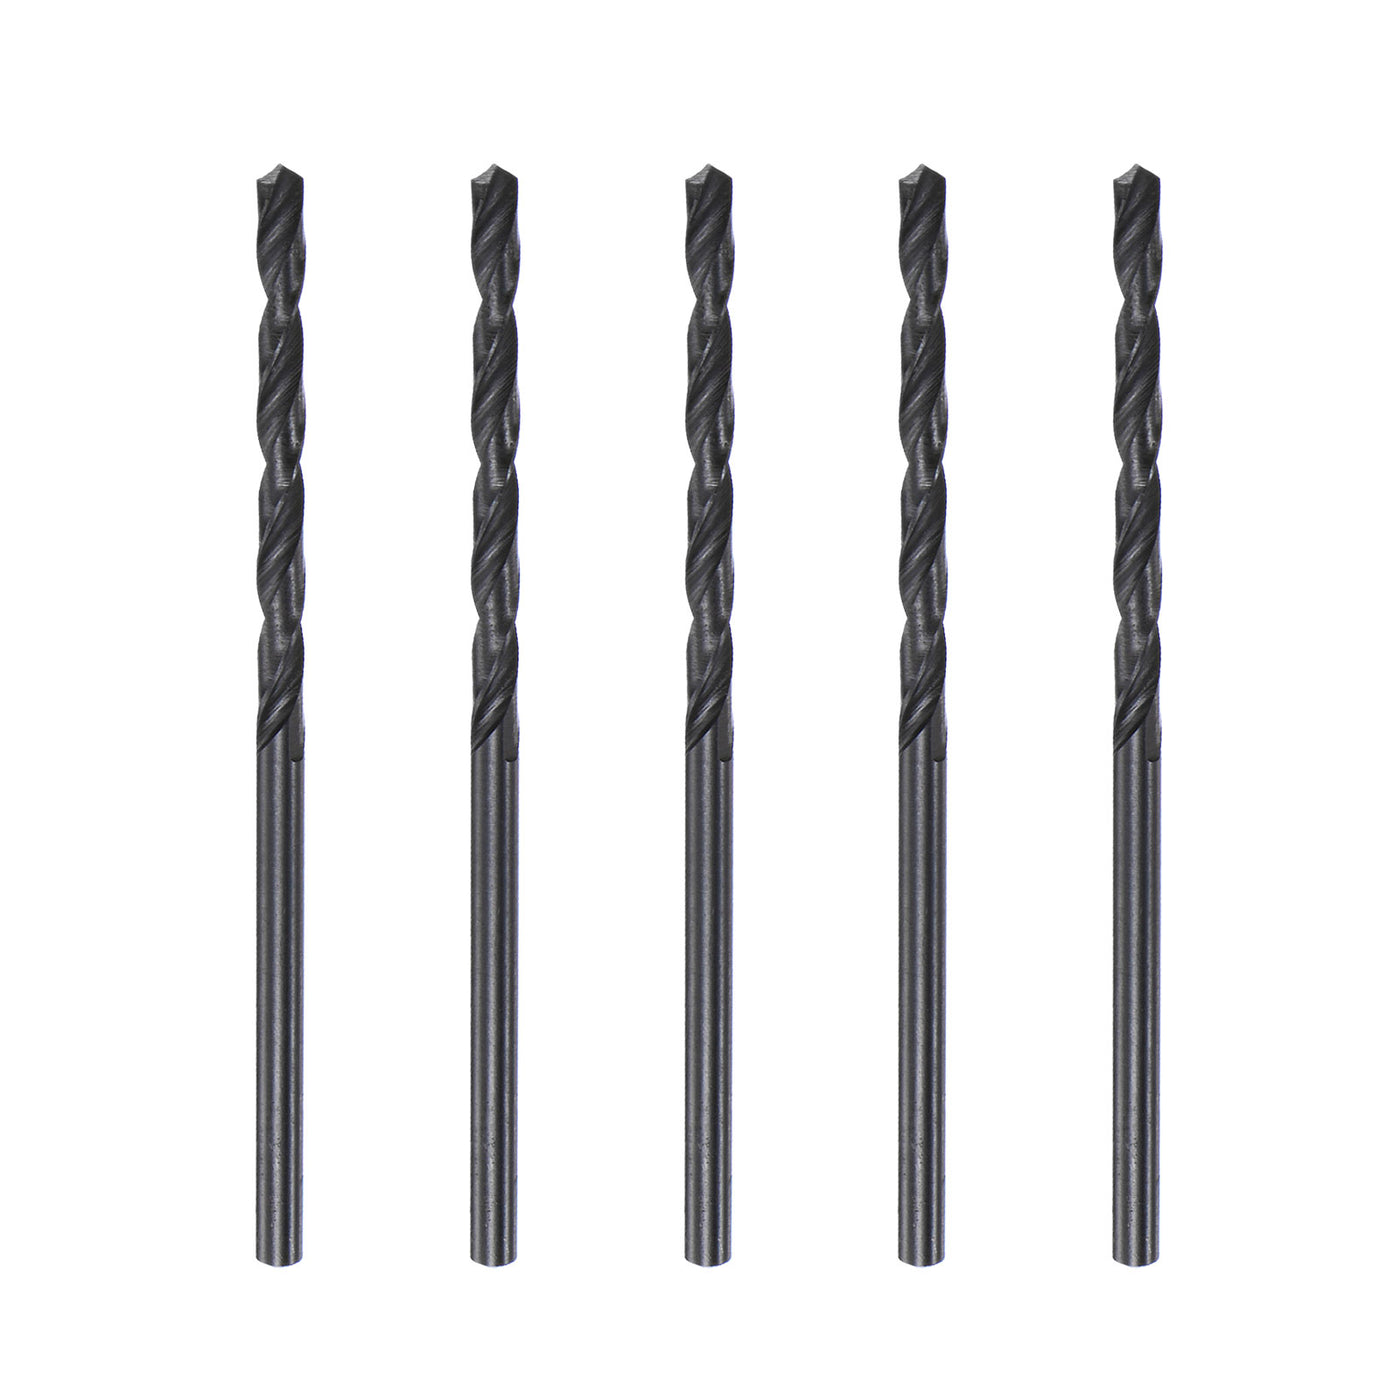 uxcell Uxcell High Speed Steel Twist Drill Bit, 2.4mm Fully Ground Black Oxide 56mm Long 5Pcs